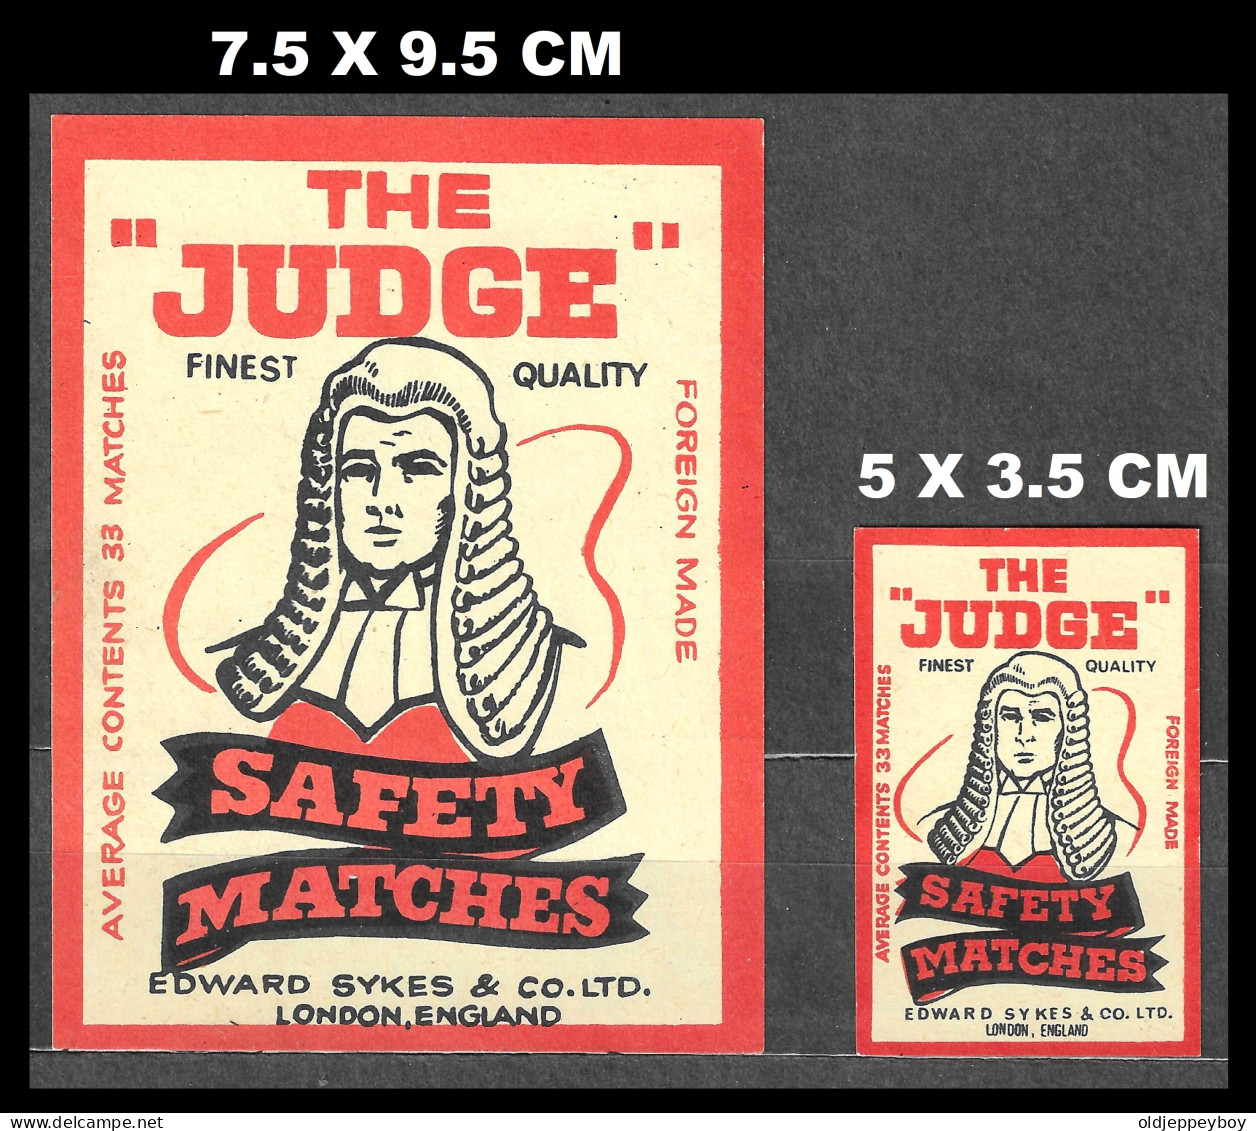 ENGLAND  MATCHBOX LABEL "THE JUDGE" EDWARD SYKES & CO.LTD LONDON SET OF 2 DIF SIZES SEE SCAN FOR SIZES  LARGE RARE - Scatole Di Fiammiferi - Etichette